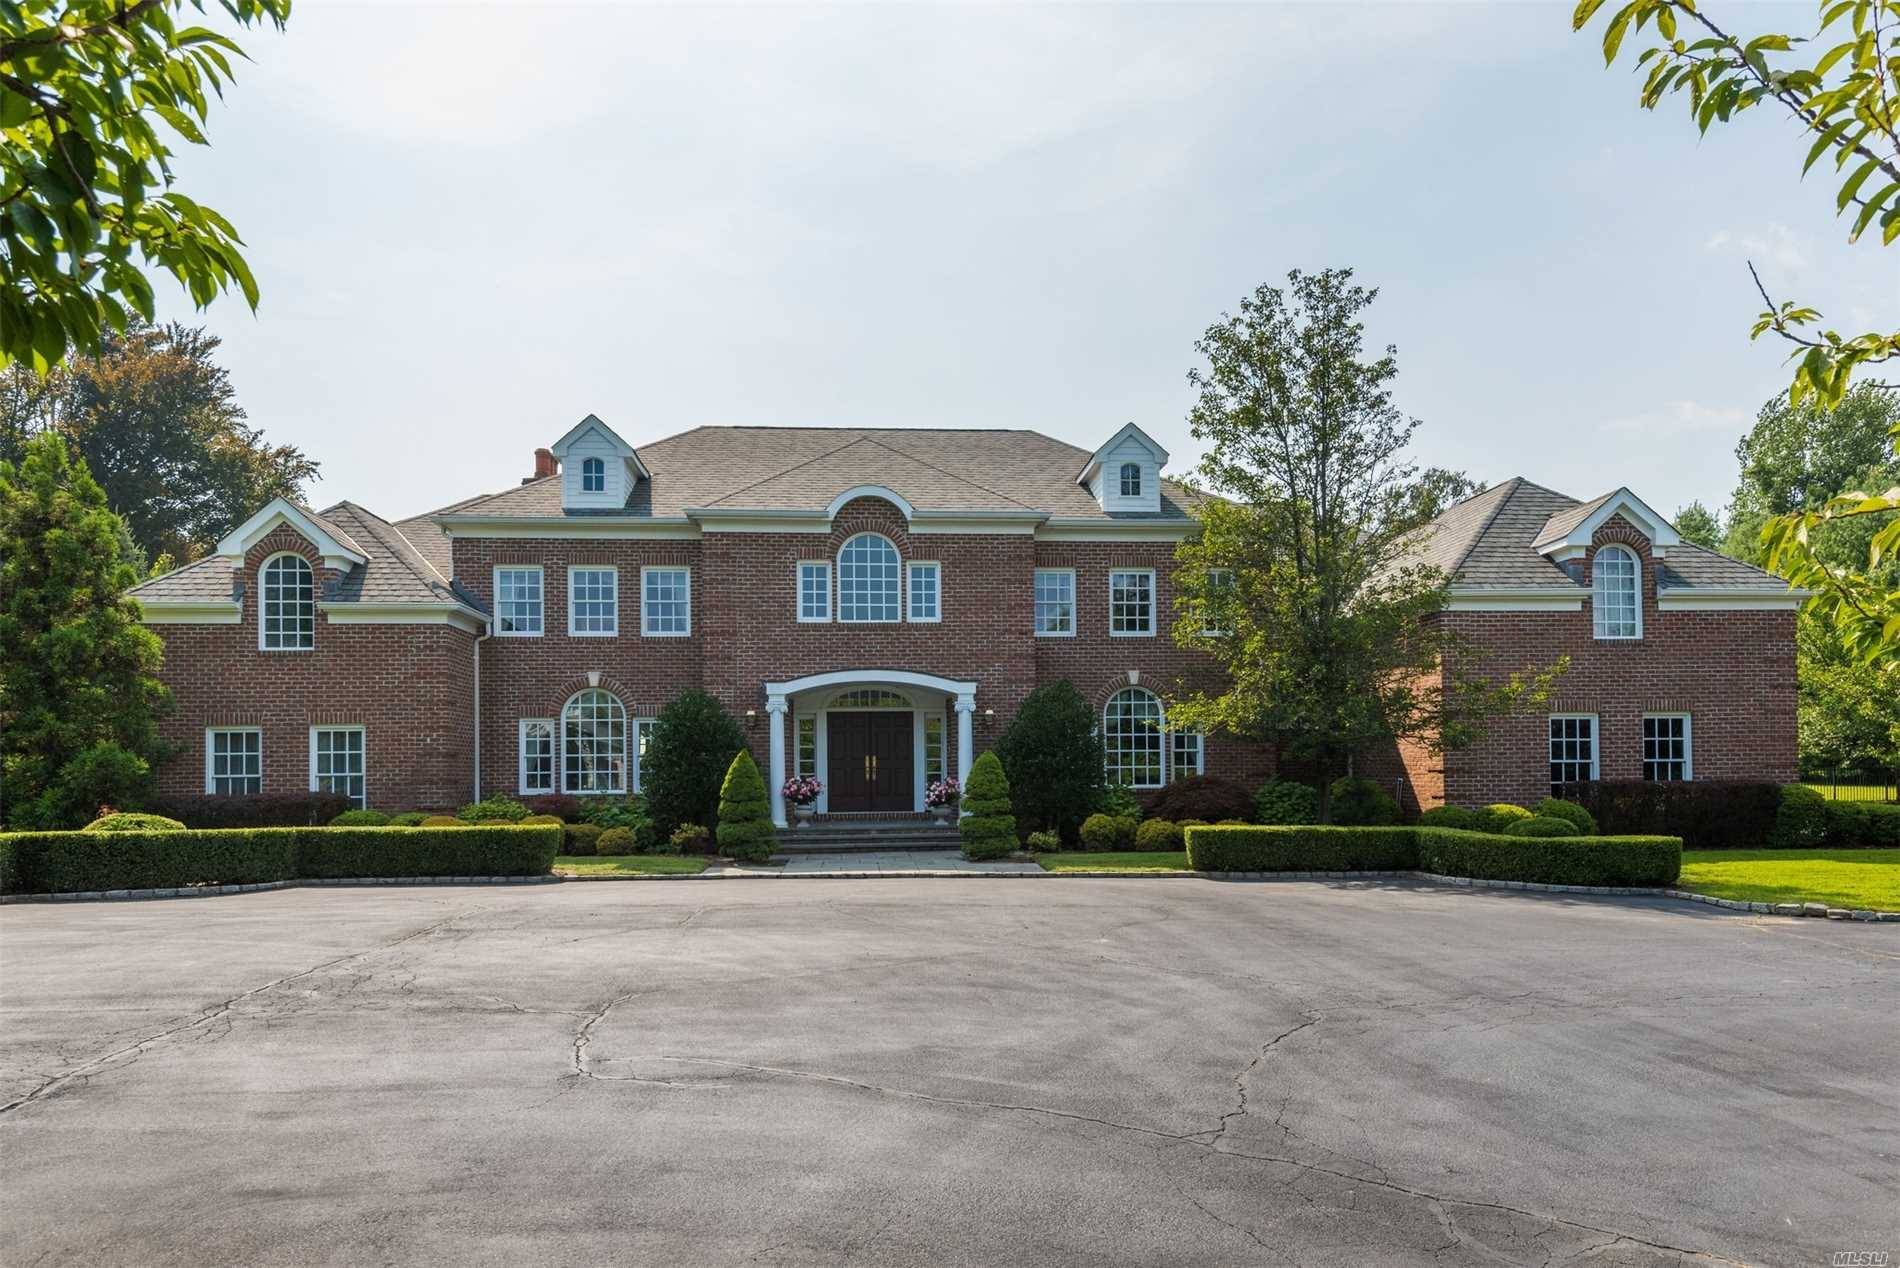 Fabulous 7000 Sq Ft Brick Colonial On One Of The Most Desirable Streets In Old Westbury.